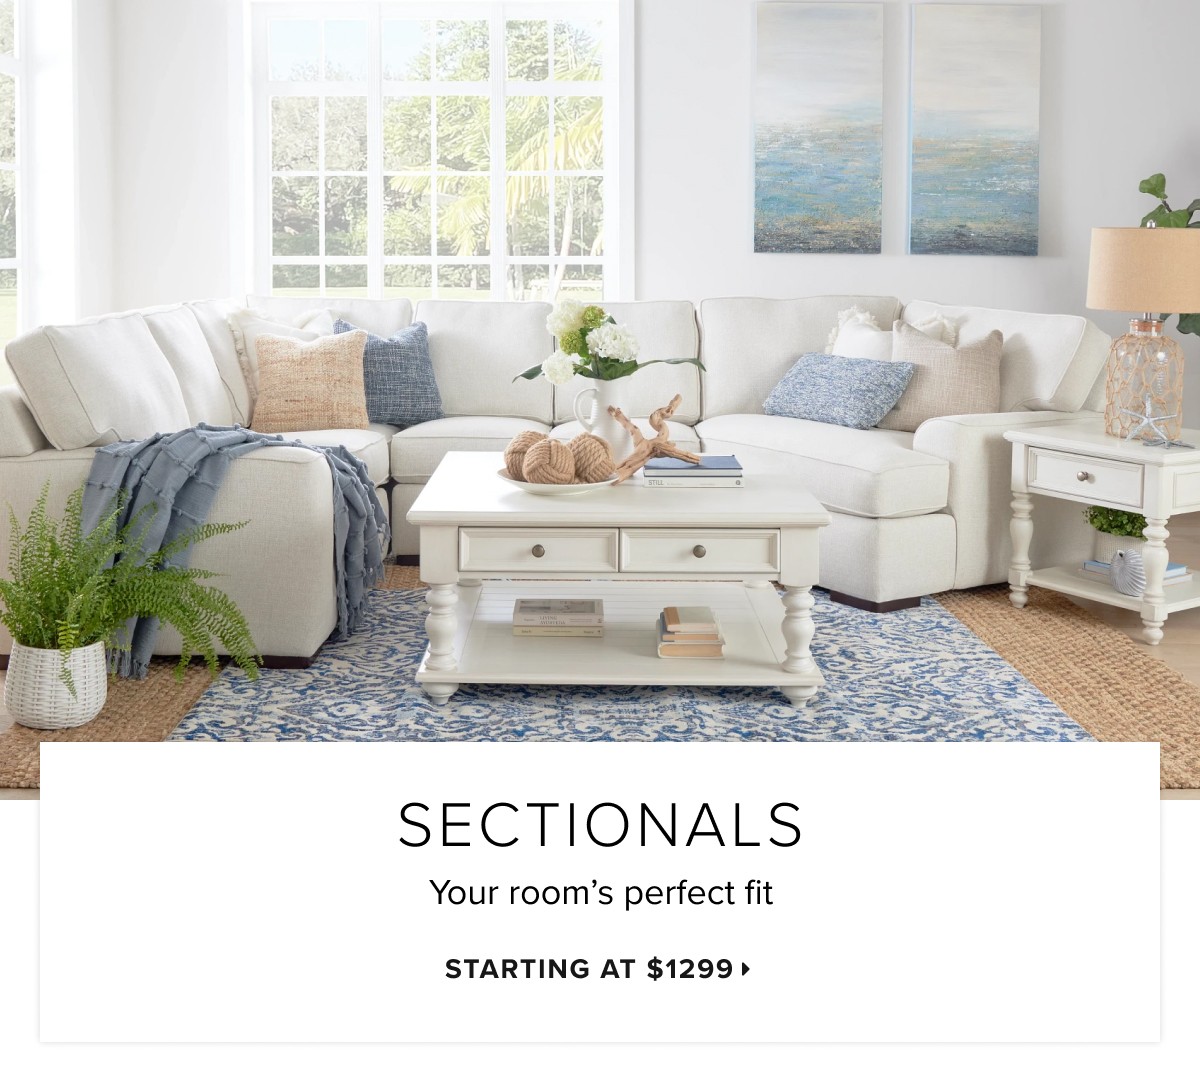 Sectionals starting at $1299 >